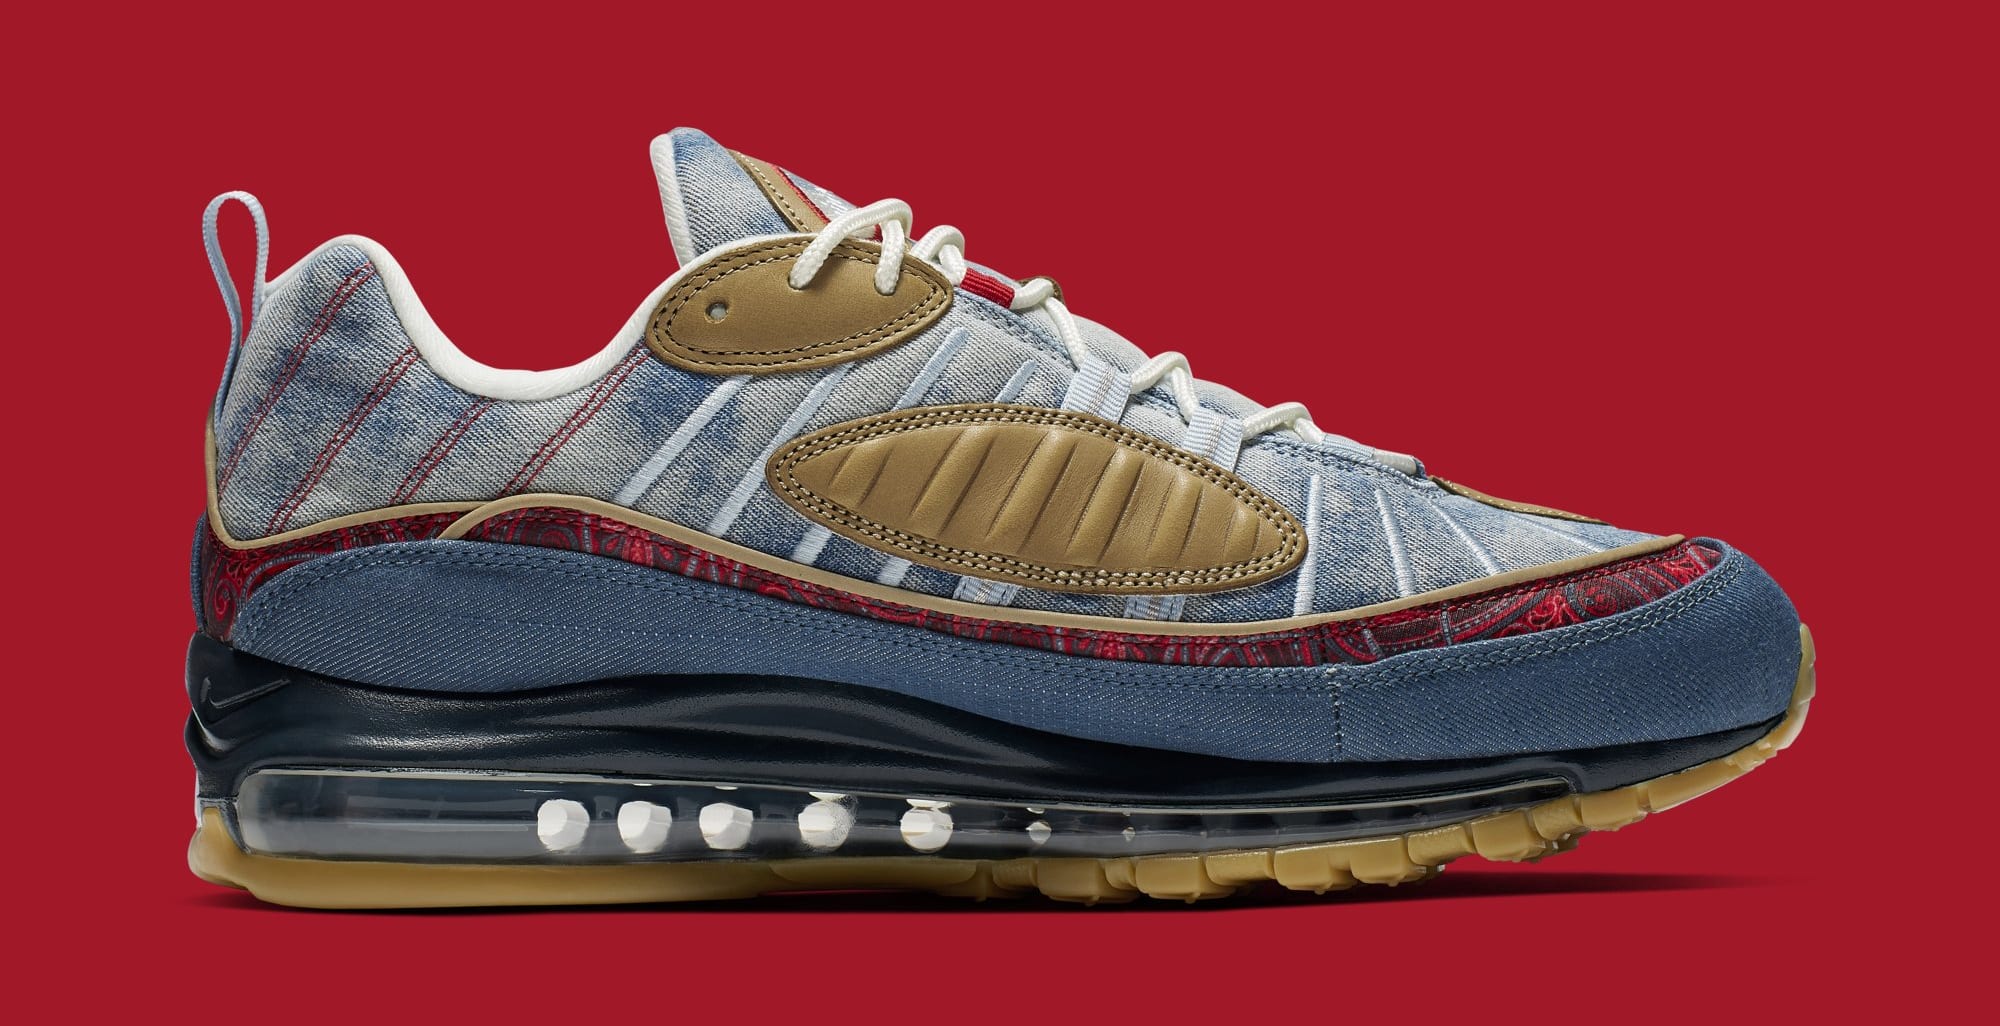 Nike Air Max 98 &#x27;Wild West&#x27; Light Armory/University Red BV6045-400 (Medial)